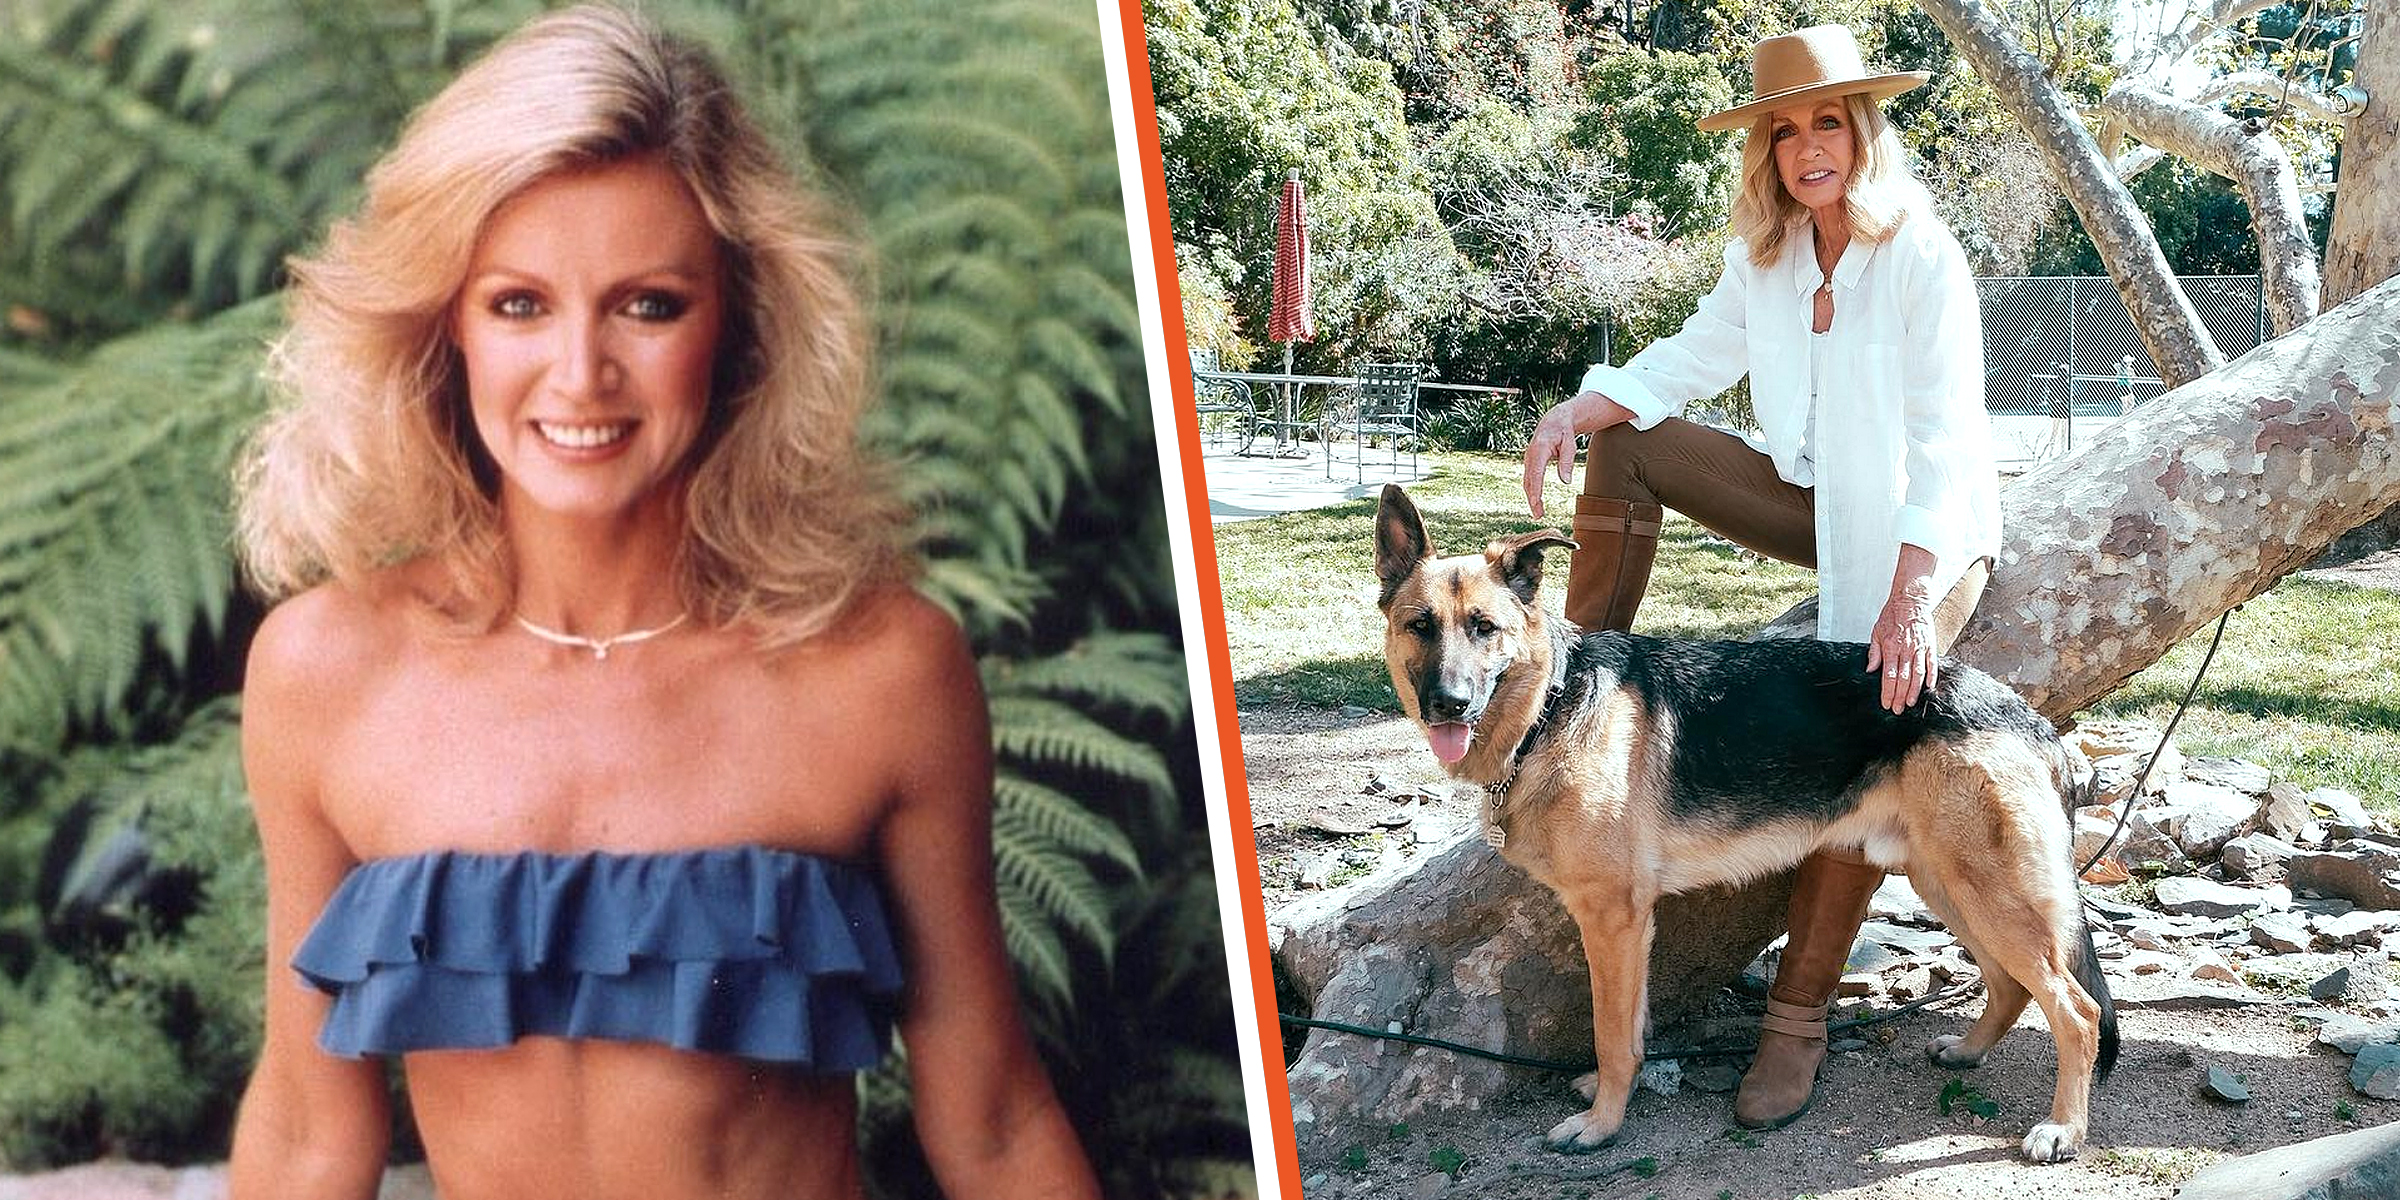 Donna Mills, 81, says eating vegetables and lifting weights keeps